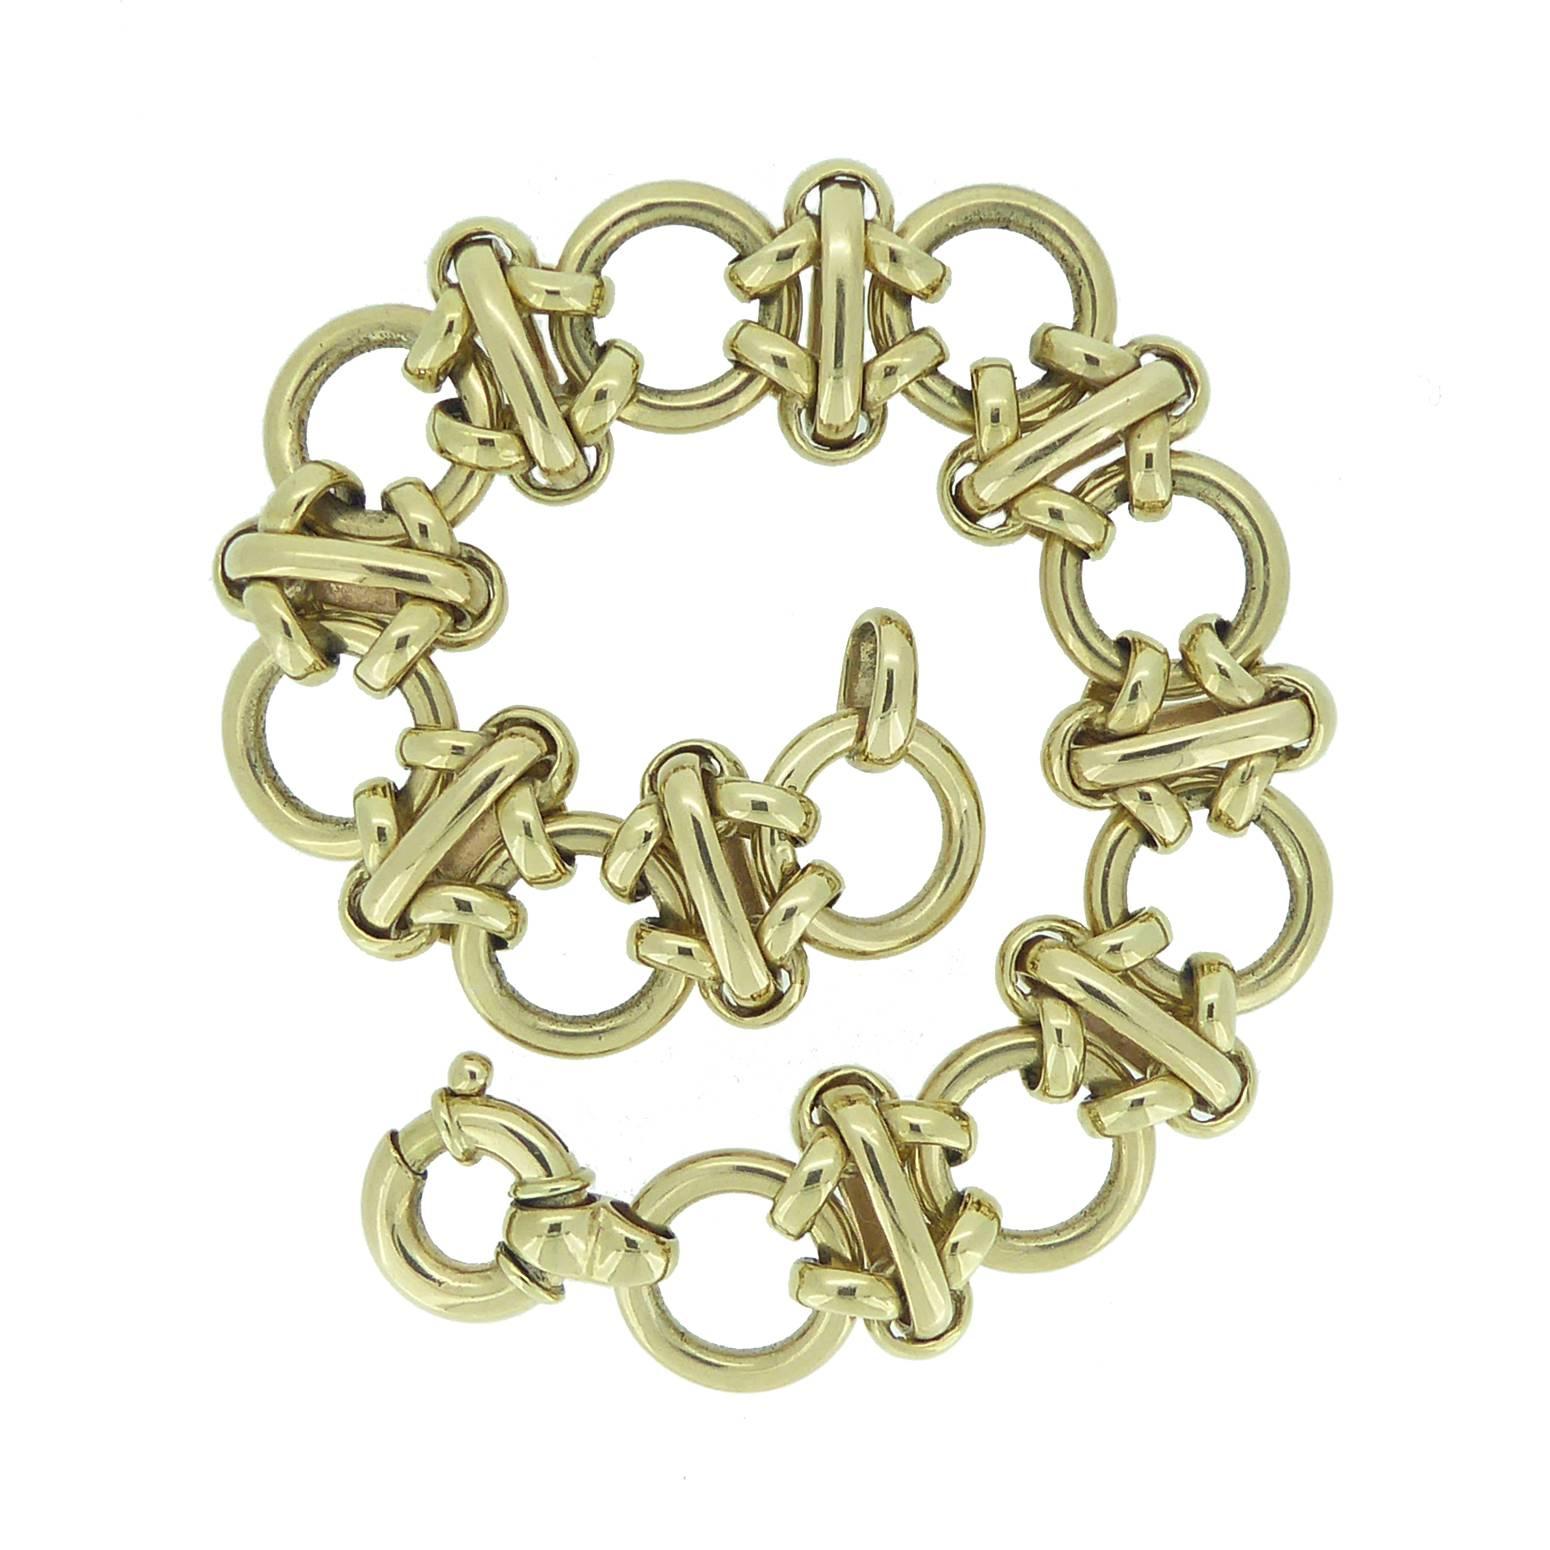 In remarkably good condition this fancy link bracelet is typical 1990's vintage style.  It's fashioned from 10 large doughnut shaped yellow gold rings approx. 13mm diameter.  Each of these links is connected by double gold rings to elongated oval